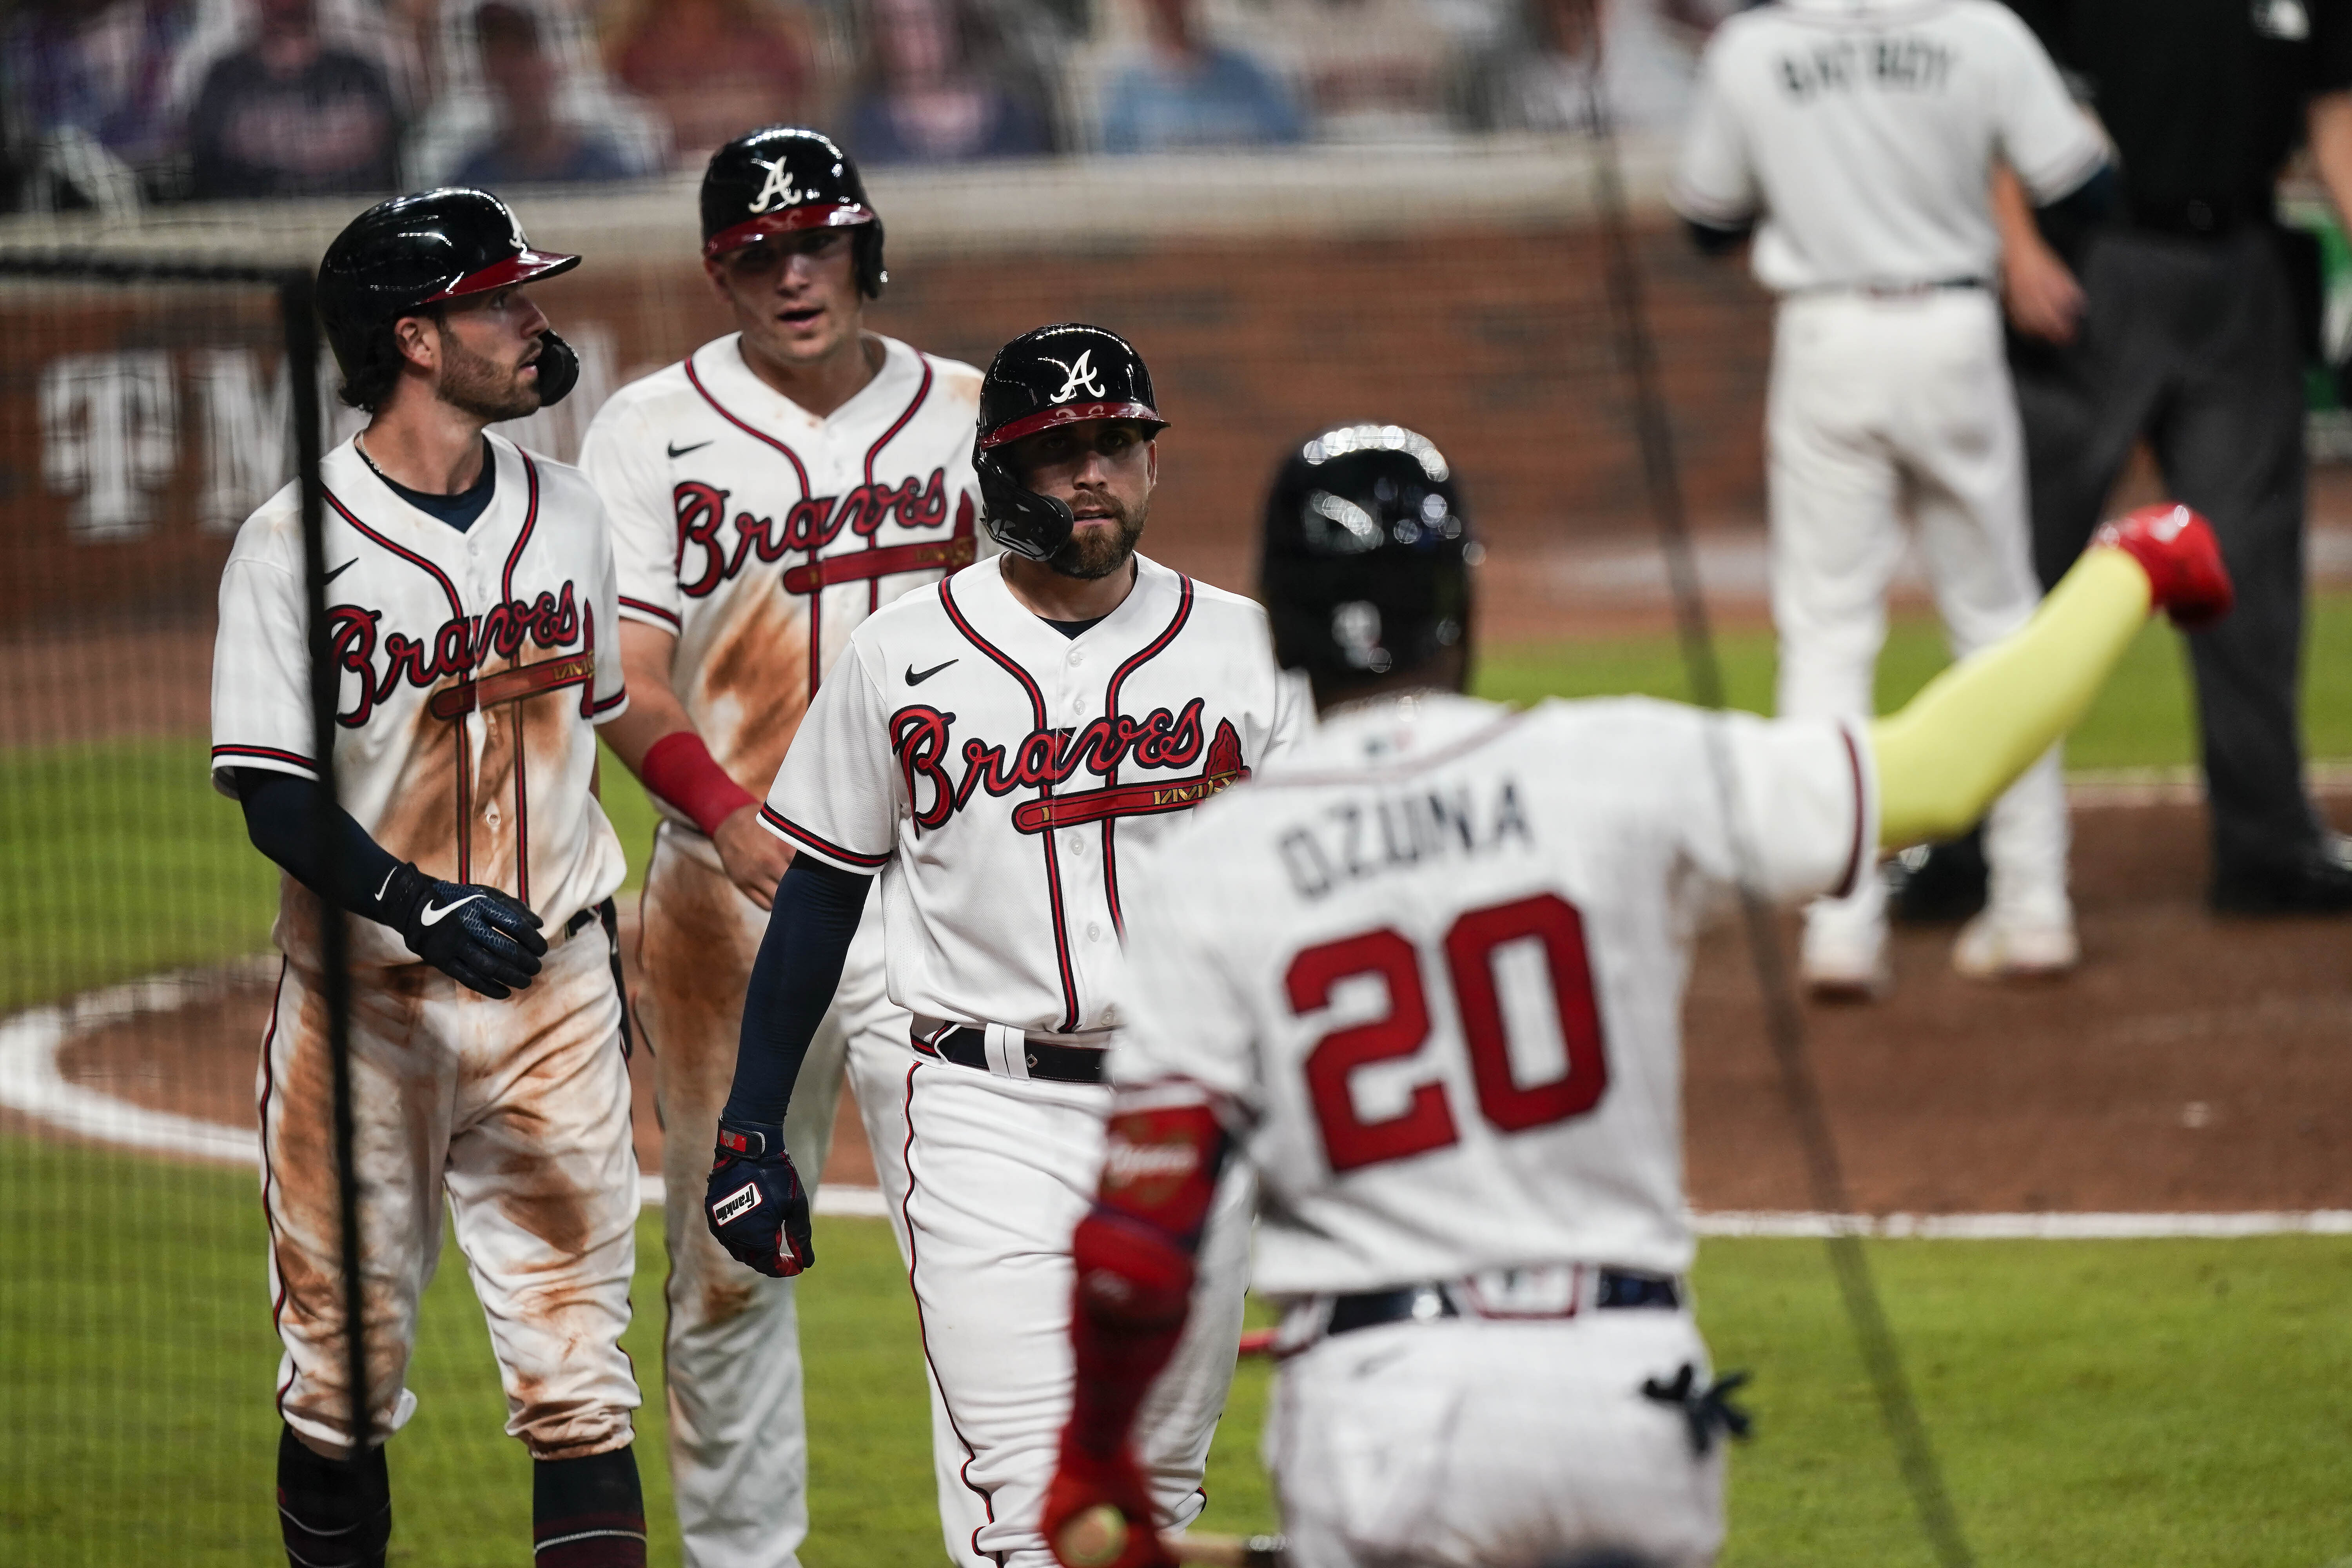 Duvall's homer in 9th inning lifts Braves past Marlins 2-1